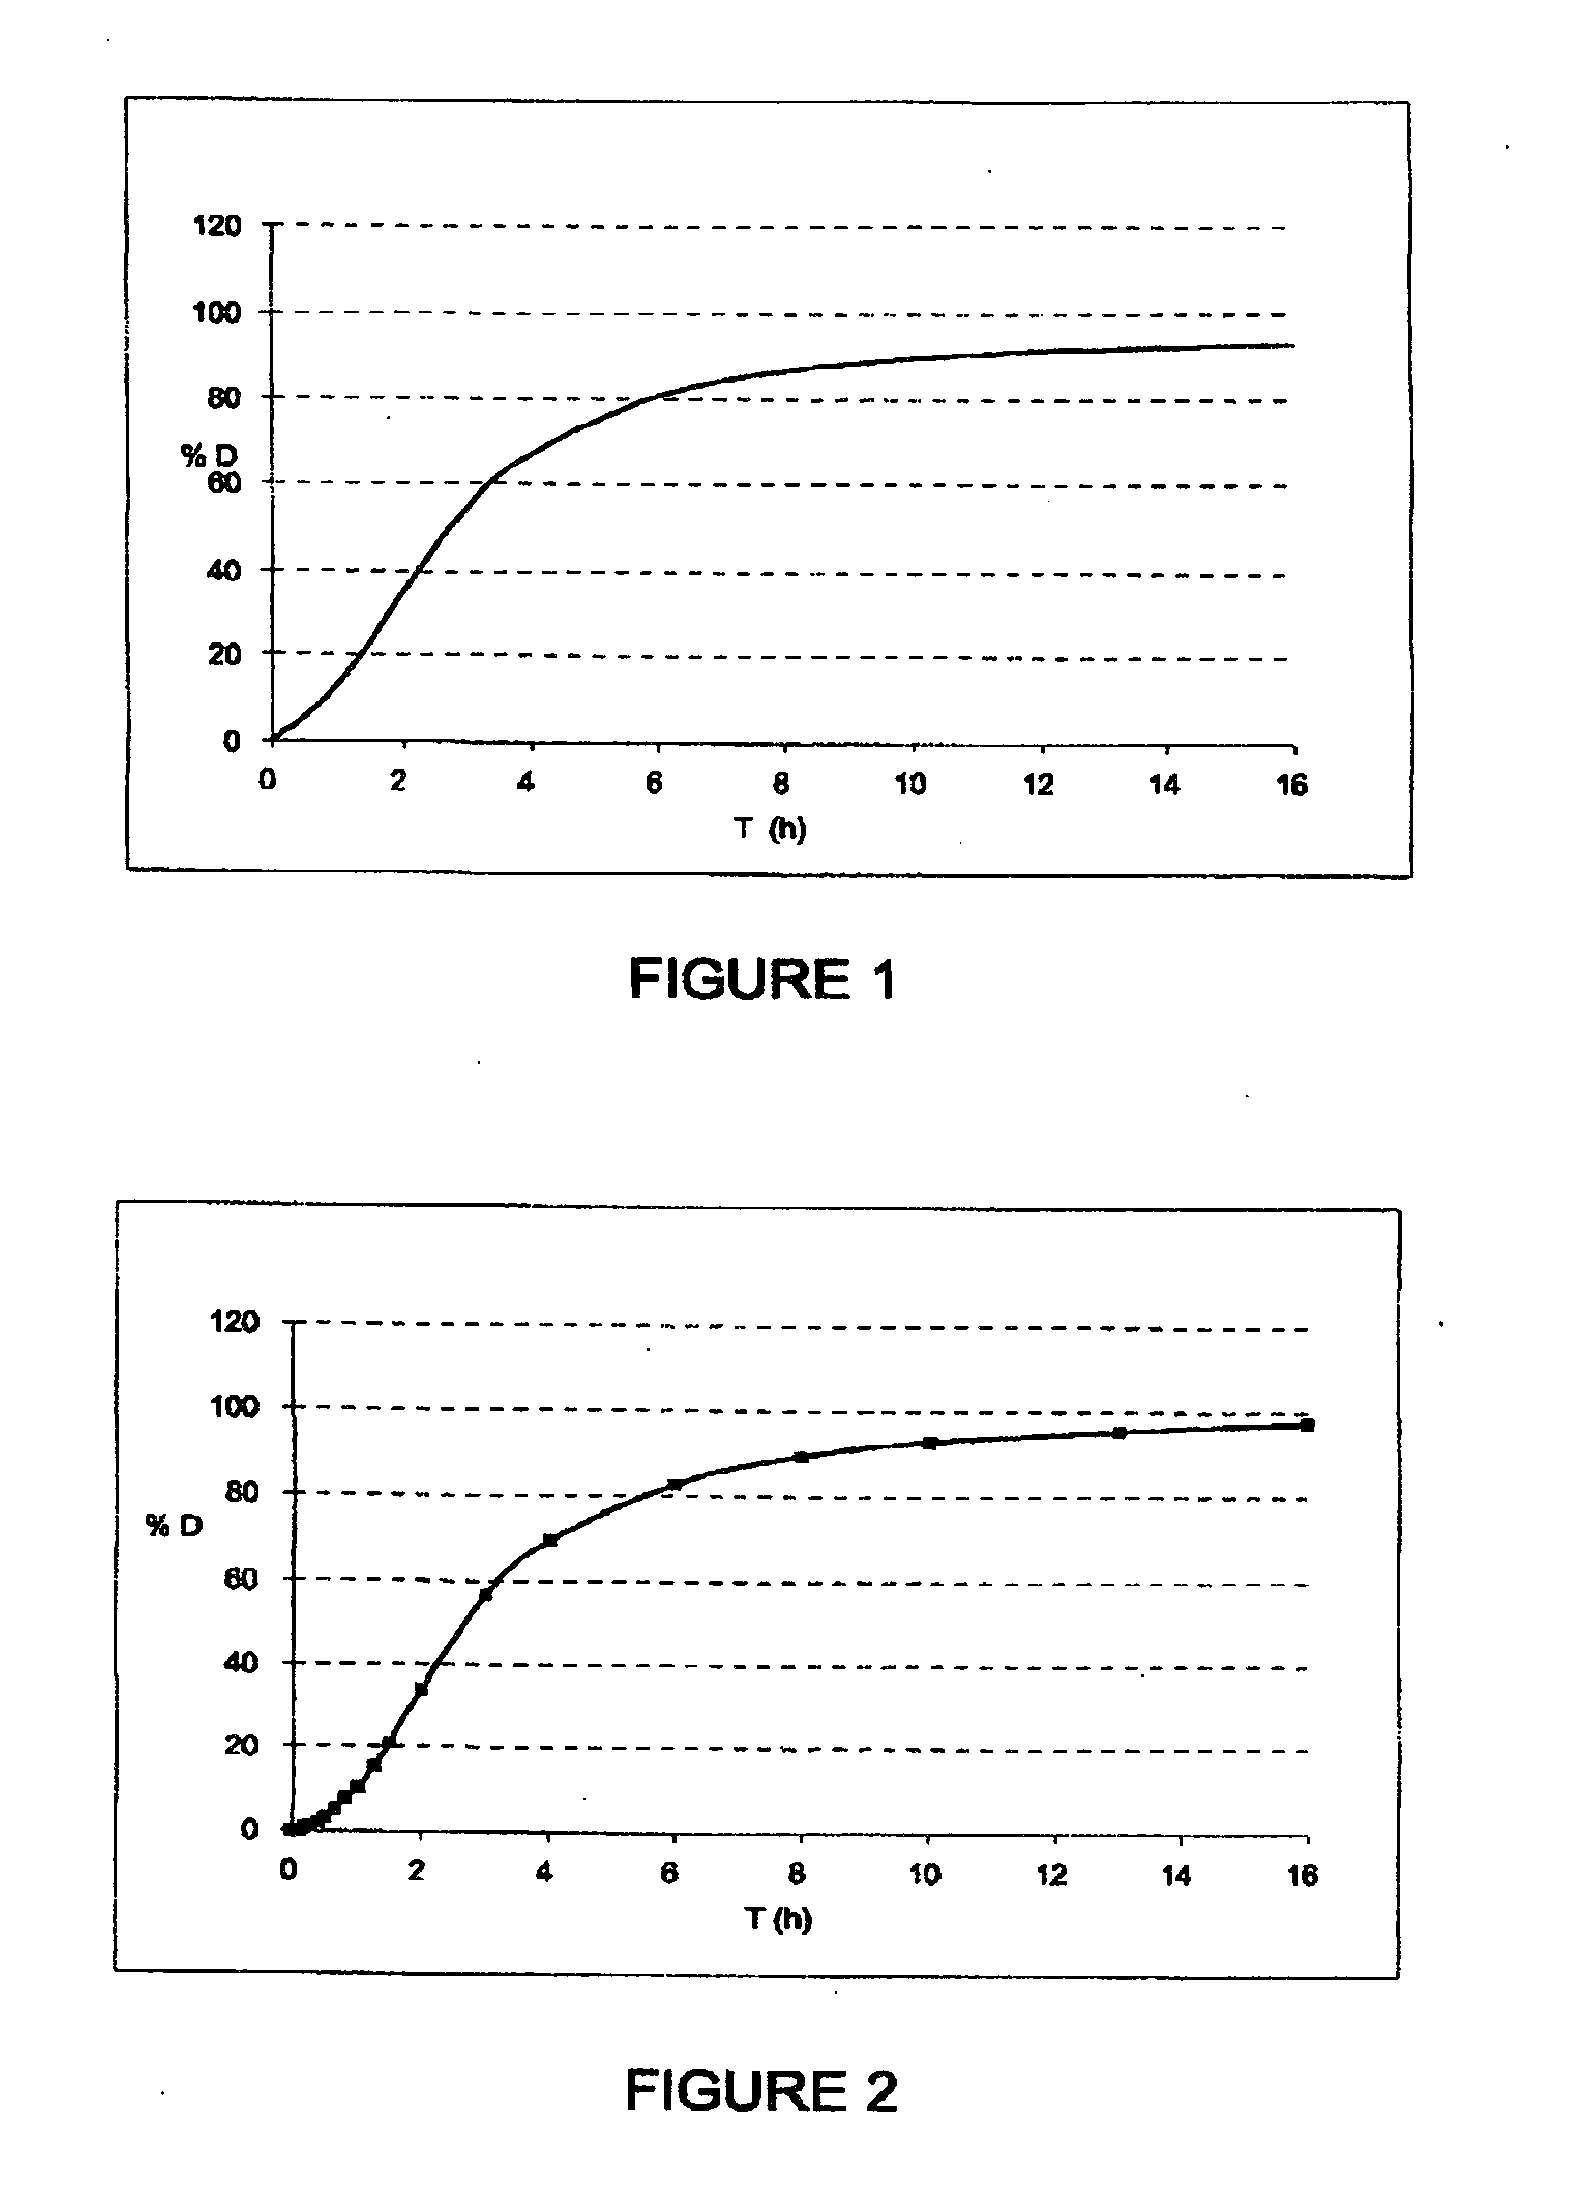 Anti-misuse microparticulate oral drug form